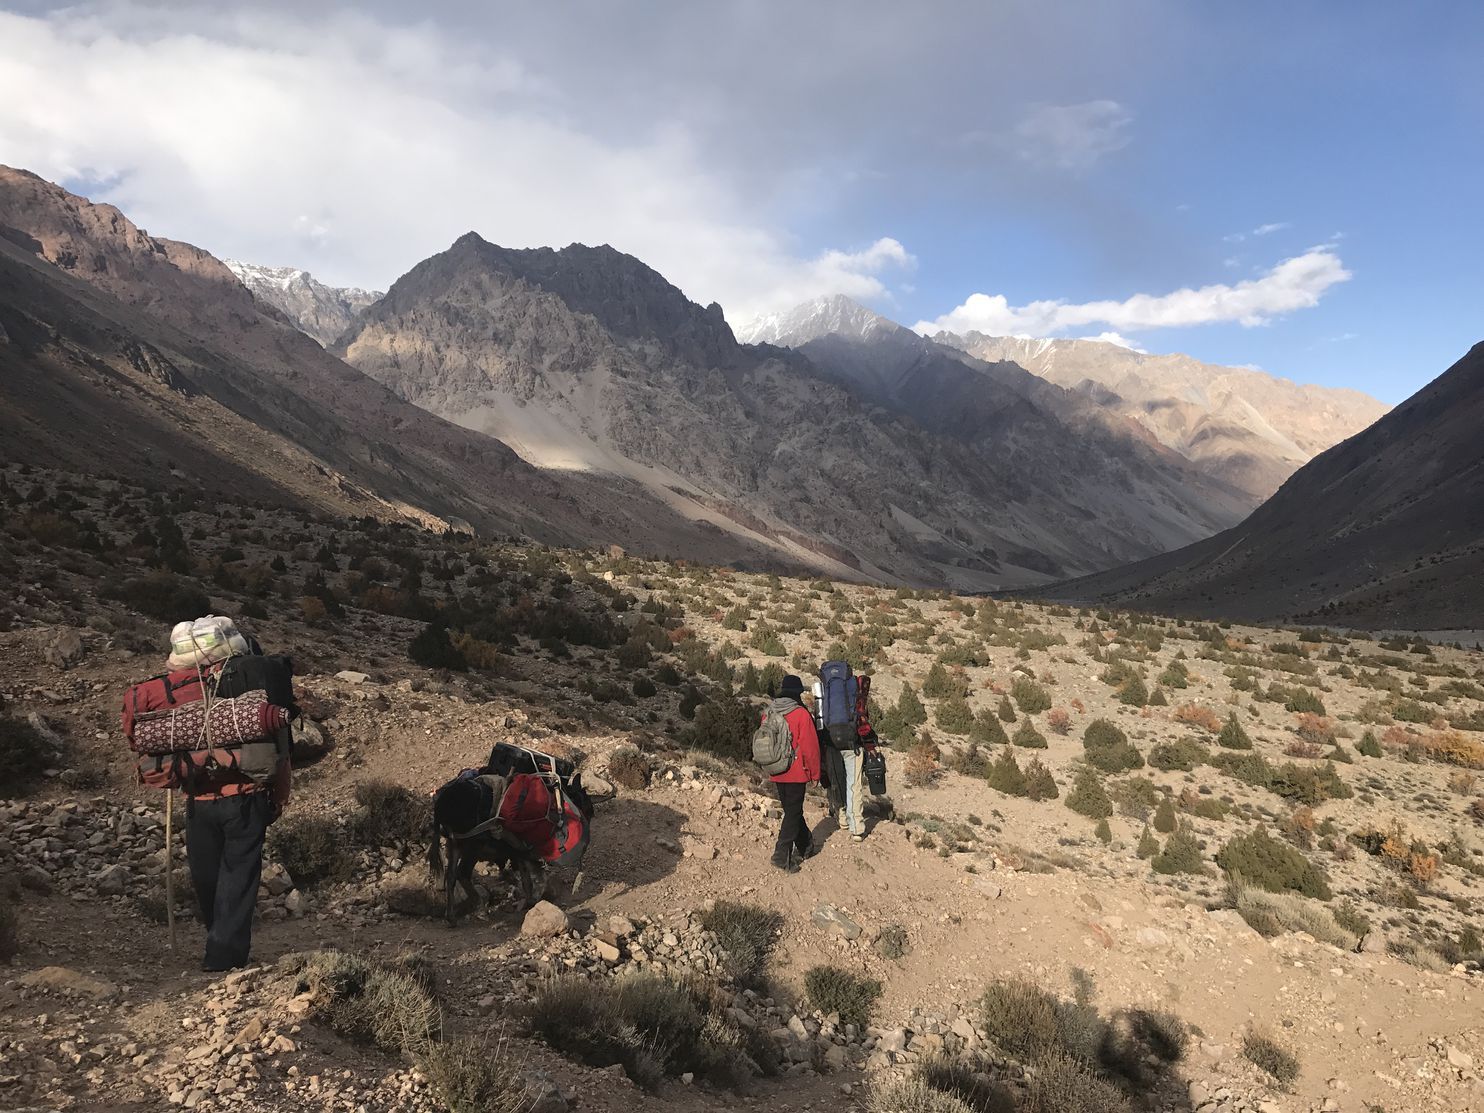 Journalist Paul Salopek took this photo of guides and walking partners in 2017 as the group entered the Gilgit-Baltistan region of Pakistan. Salopek is on what he calls the Out of Eden Walk, a years-long journey to trace the path of human migration. He started the walk in 2013, and originally planned to finish this year. He has realized he needs more time to practice “slow journalism” — seeing, listening and experiencing new things. Image by Paul Salopek. Pakistan, 2017.